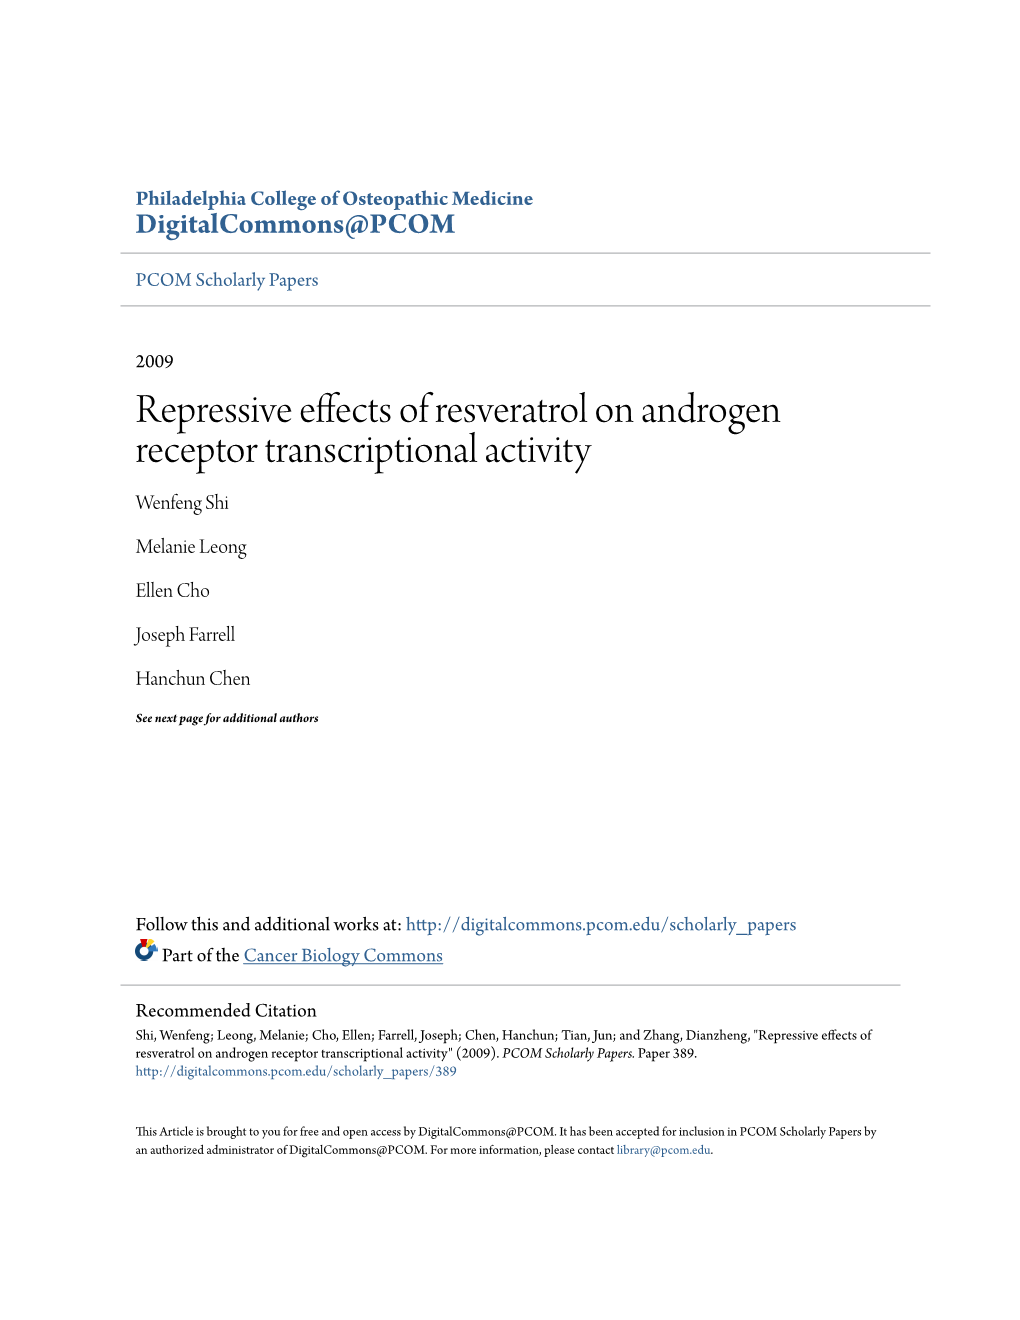 Repressive Effects of Resveratrol on Androgen Receptor Transcriptional Activity Wenfeng Shi